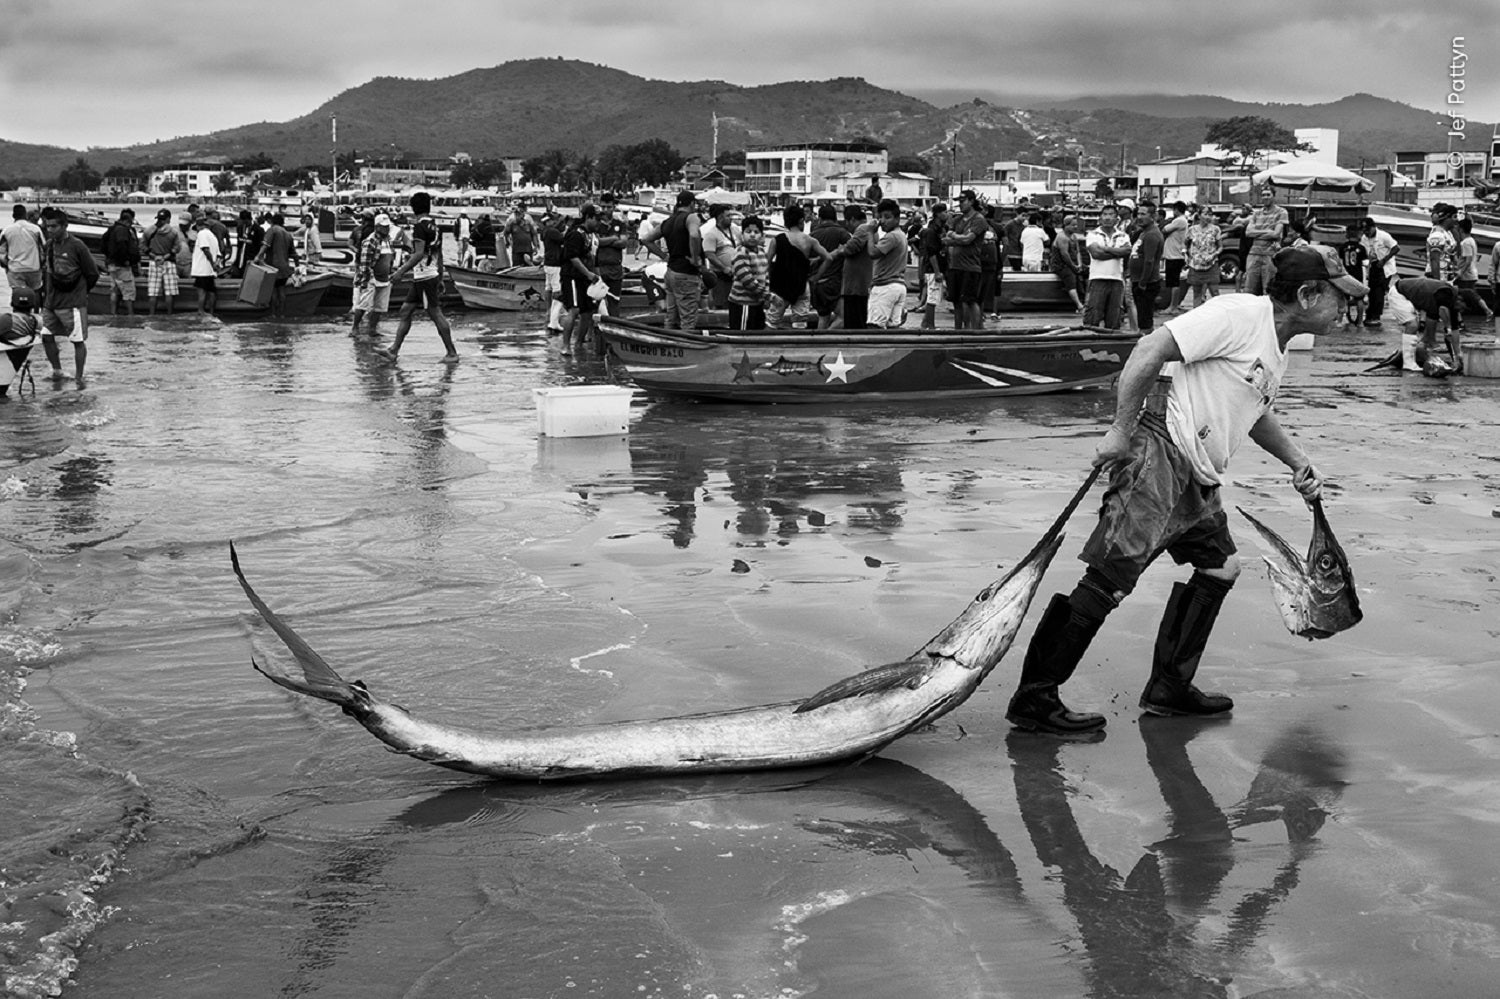 Fisher dragging swordfish across beach in black and white